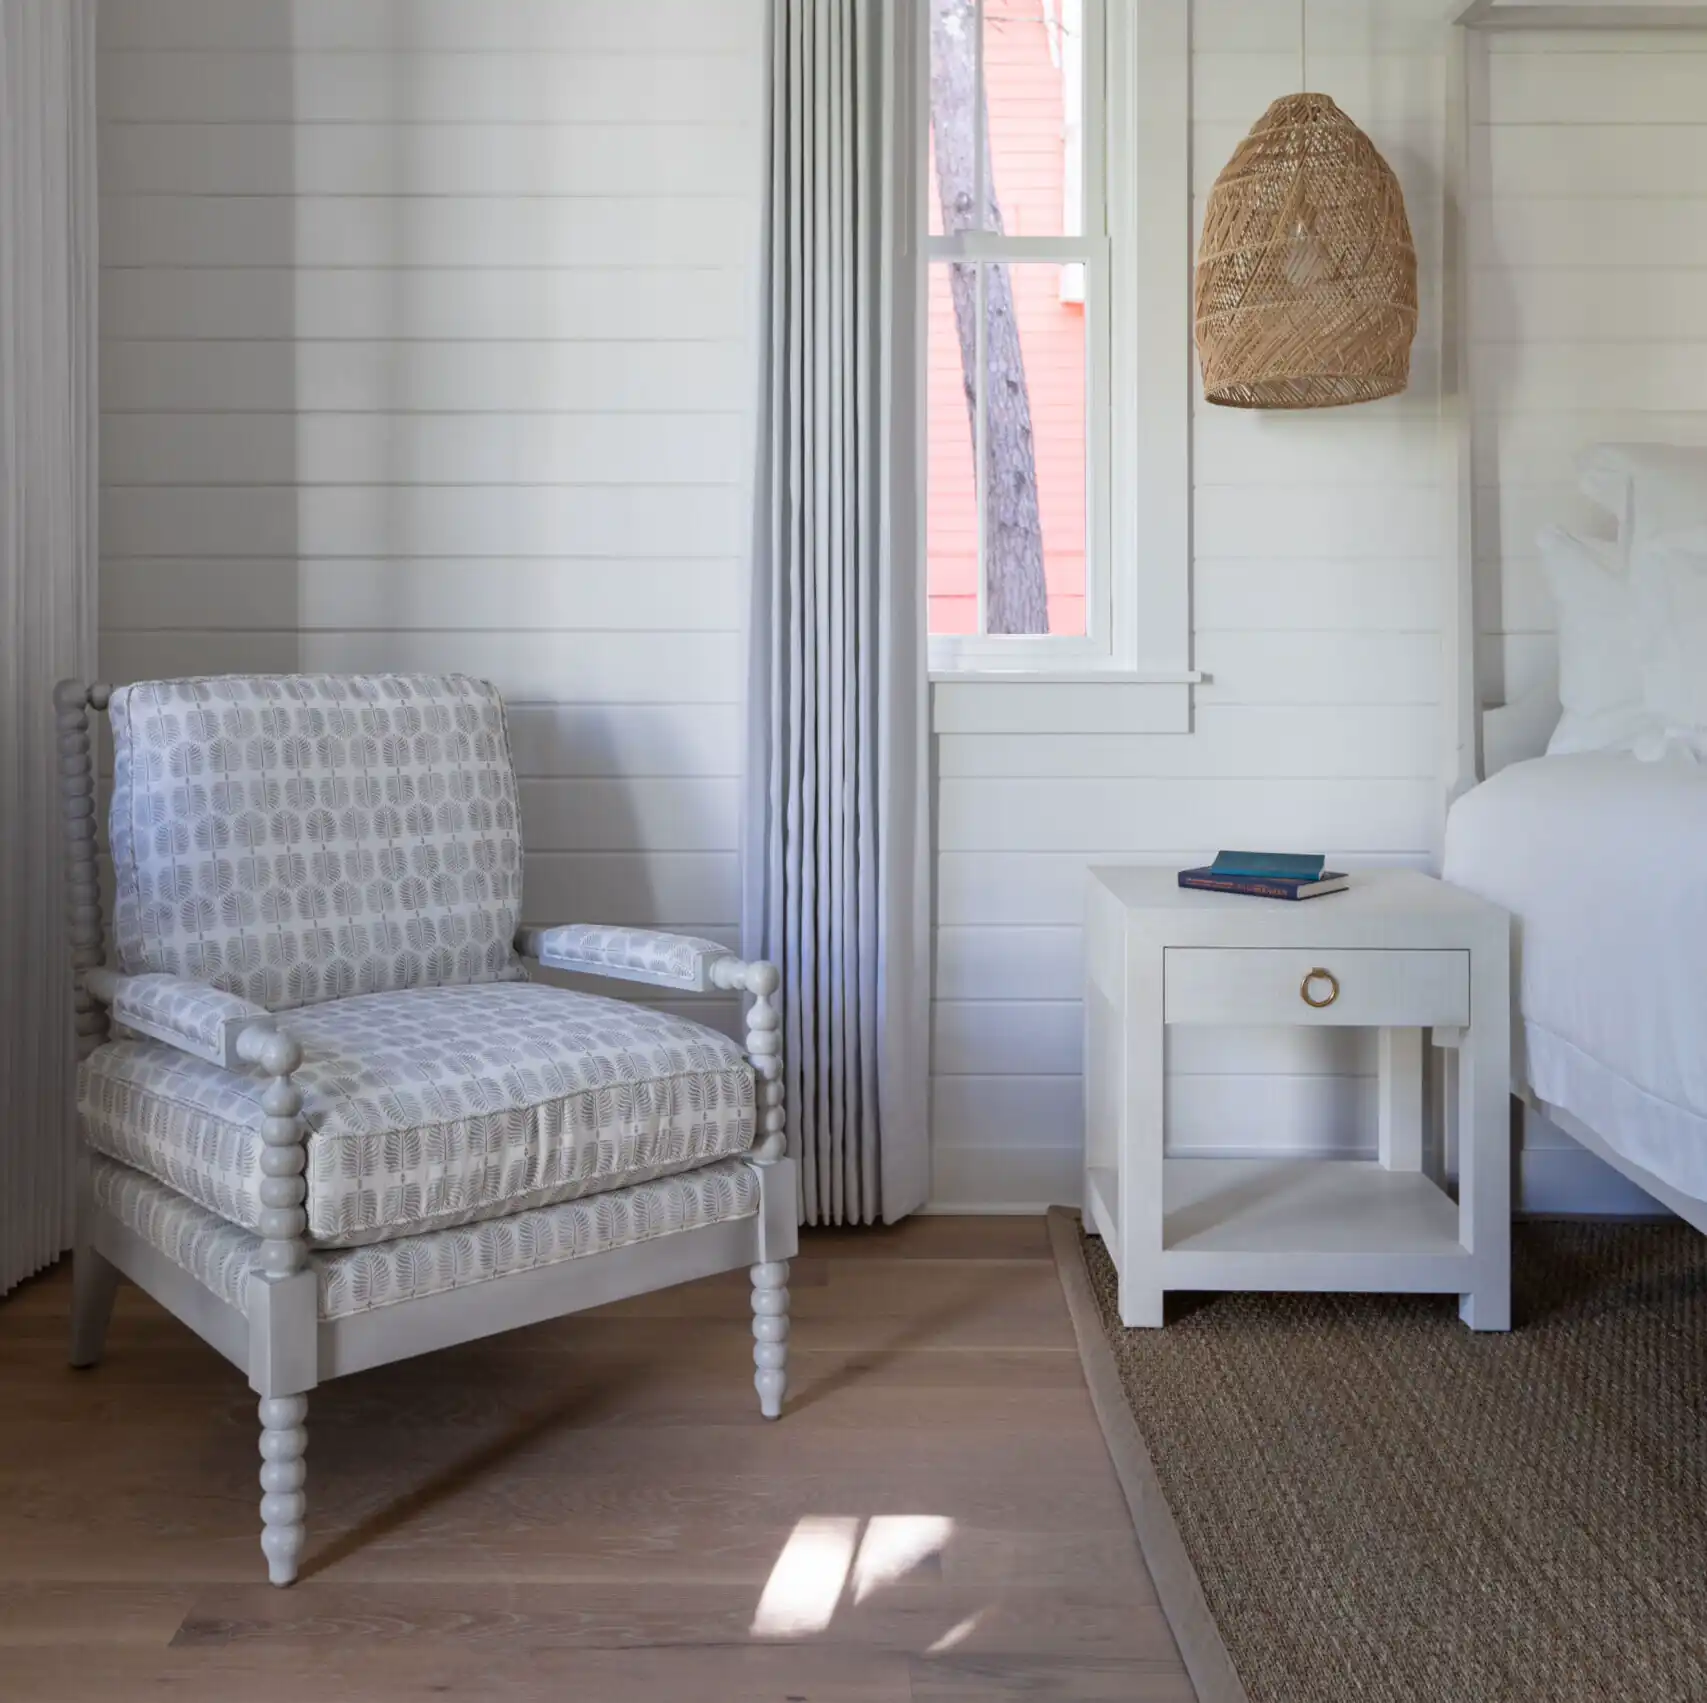 Picture of the white chair in the bedroom with wooden hanging light